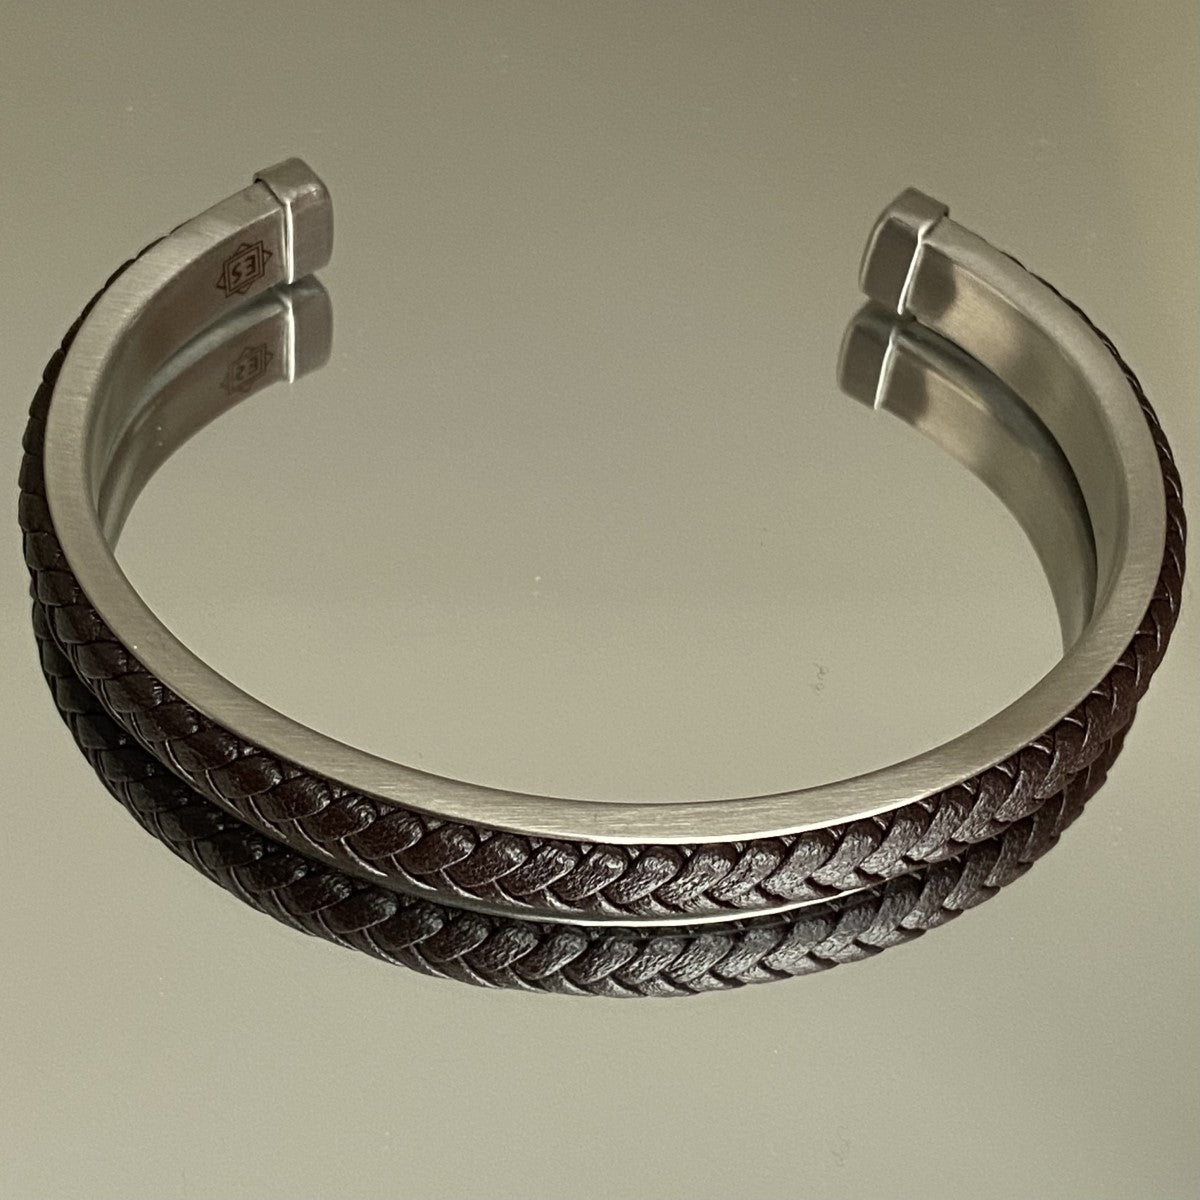 Men's Cuff with Braided Pure Brown Leather on Brushed Stainless Steel